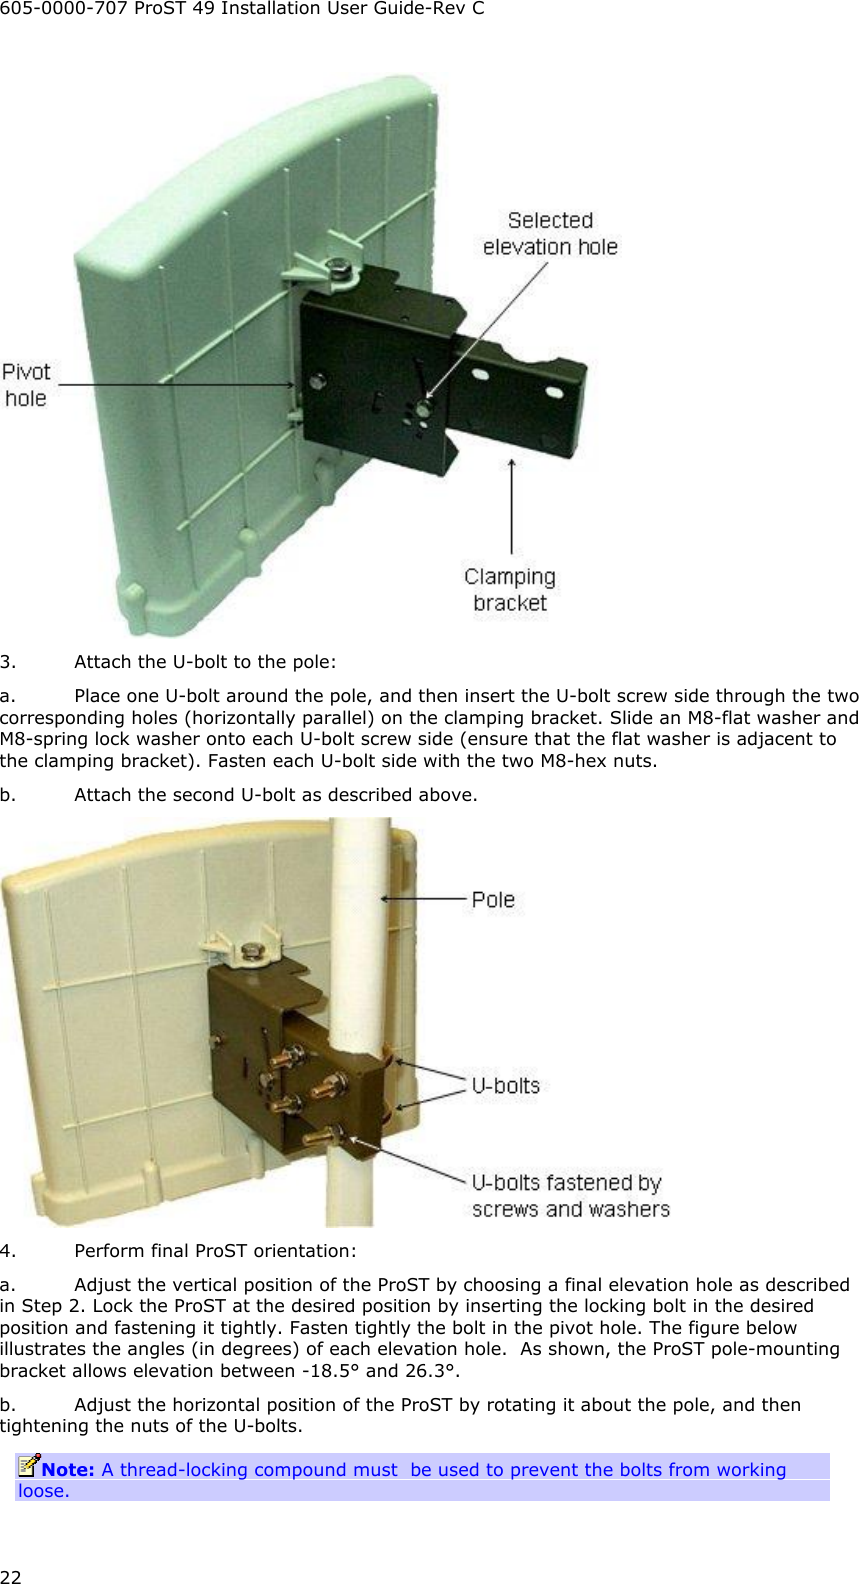 605-0000-707 ProST 49 Installation User Guide-Rev C 22  3. Attach the U-bolt to the pole: a. Place one U-bolt around the pole, and then insert the U-bolt screw side through the two corresponding holes (horizontally parallel) on the clamping bracket. Slide an M8-flat washer and M8-spring lock washer onto each U-bolt screw side (ensure that the flat washer is adjacent to the clamping bracket). Fasten each U-bolt side with the two M8-hex nuts.  b. Attach the second U-bolt as described above.  4. Perform final ProST orientation: a. Adjust the vertical position of the ProST by choosing a final elevation hole as described in Step 2. Lock the ProST at the desired position by inserting the locking bolt in the desired position and fastening it tightly. Fasten tightly the bolt in the pivot hole. The figure below illustrates the angles (in degrees) of each elevation hole.  As shown, the ProST pole-mounting bracket allows elevation between -18.5° and 26.3°. b. Adjust the horizontal position of the ProST by rotating it about the pole, and then tightening the nuts of the U-bolts. Note: A thread-locking compound must  be used to prevent the bolts from working loose.  